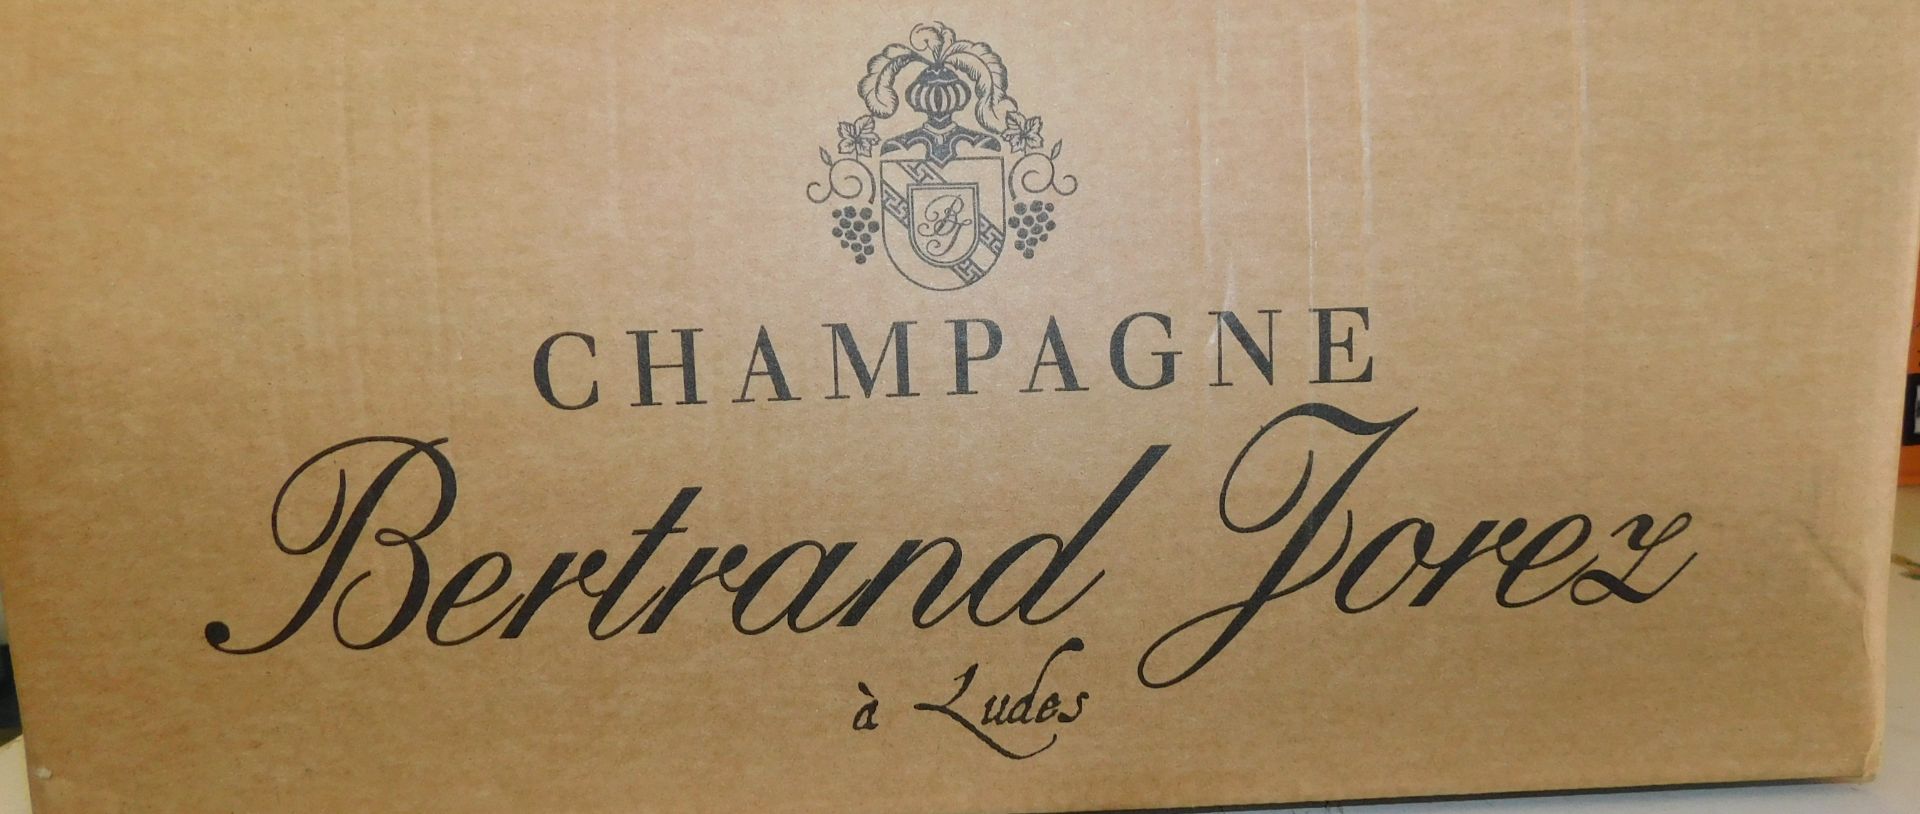 6 Bottles of Bertrand Jorez Champagne, 750ml (Located Stockport – See General Notes for More - Image 2 of 2